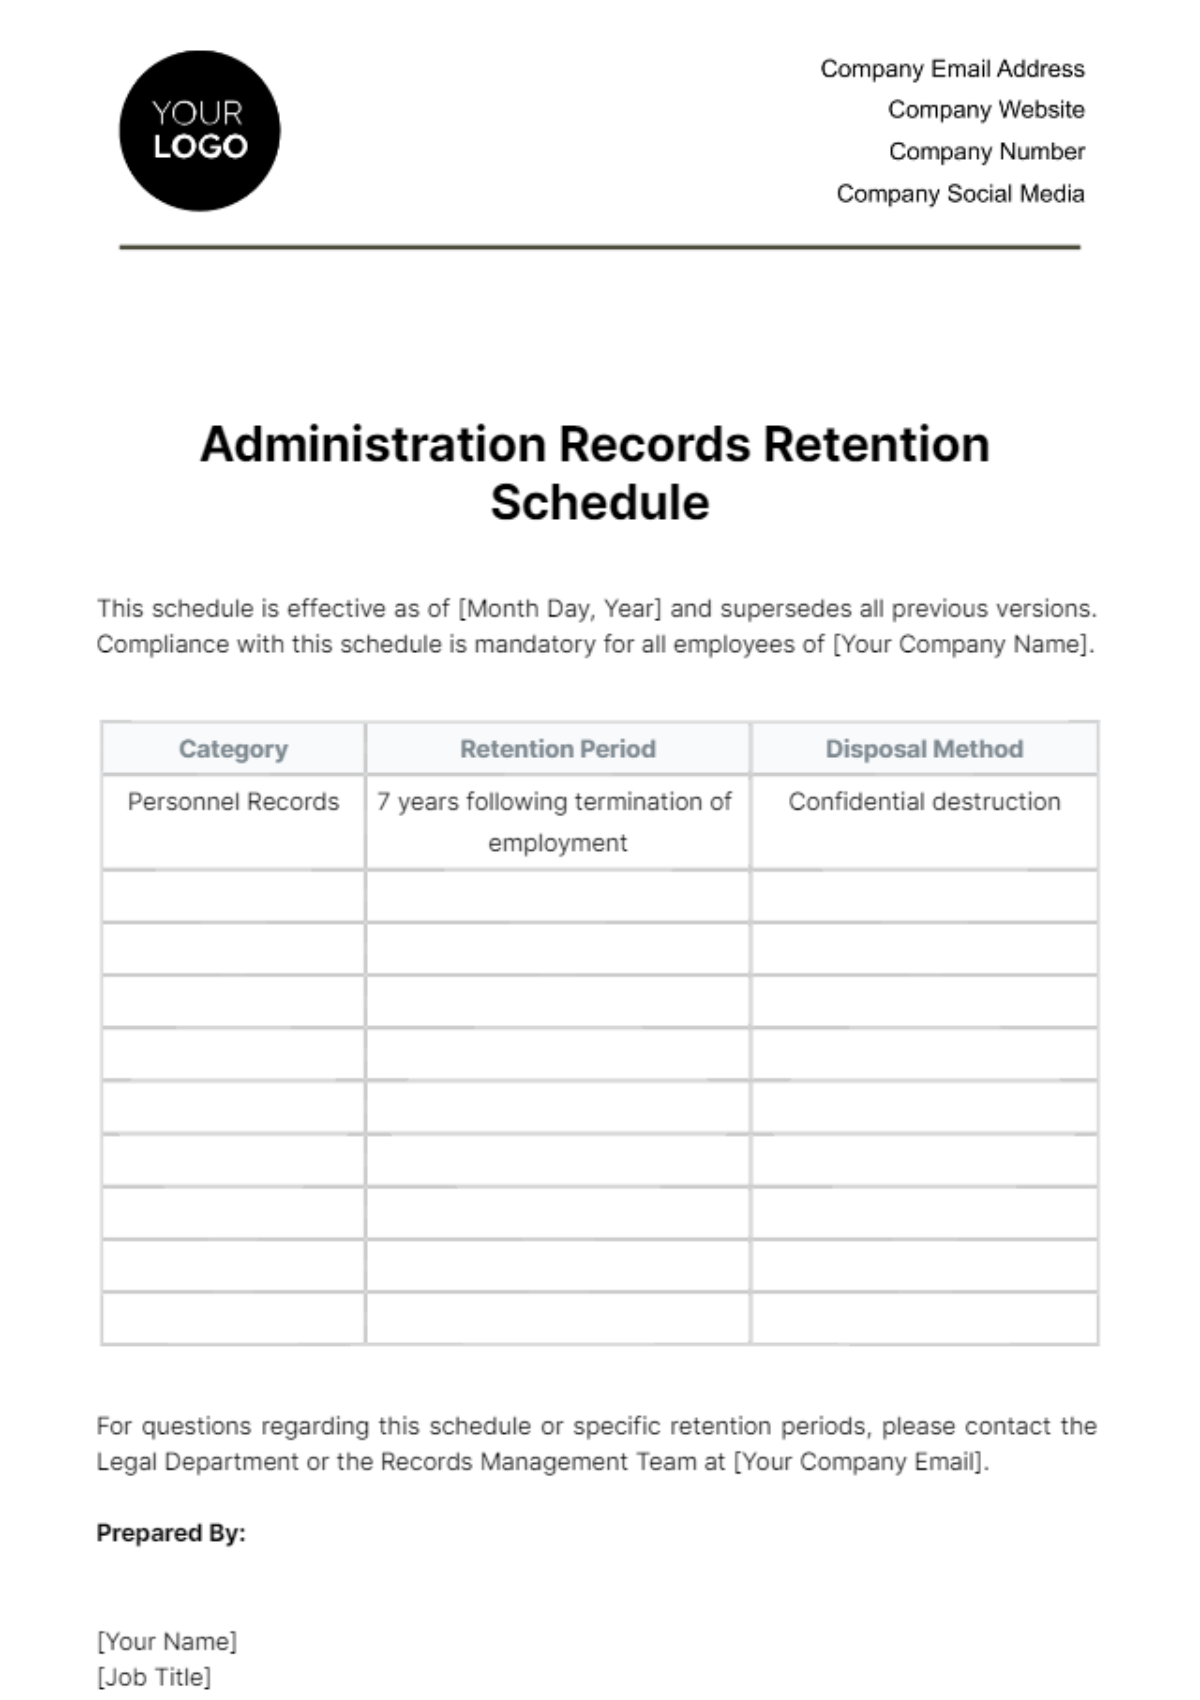 Administration Records Retention Schedule Template